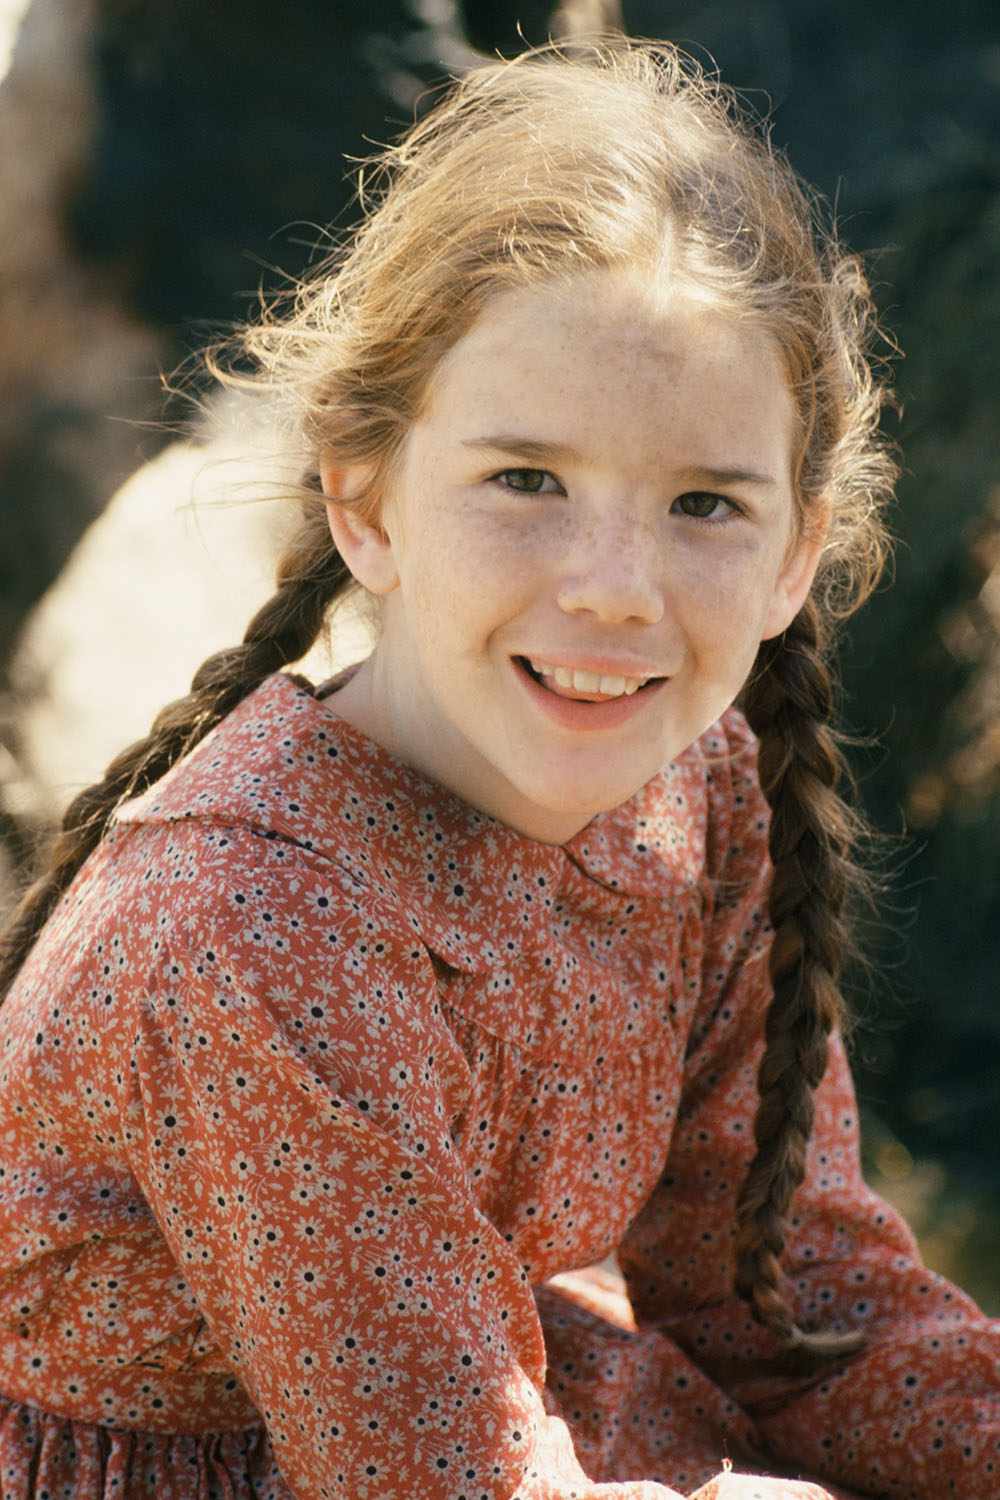 LITTLE HOUSE ON THE PRAIRIE -- Season 1 -- Pictured: Melissa Gilbert as Laura Ingalls Wilder (Photo by NBCU Photo Bank/NBCUniversal via Getty Images via Getty Images)